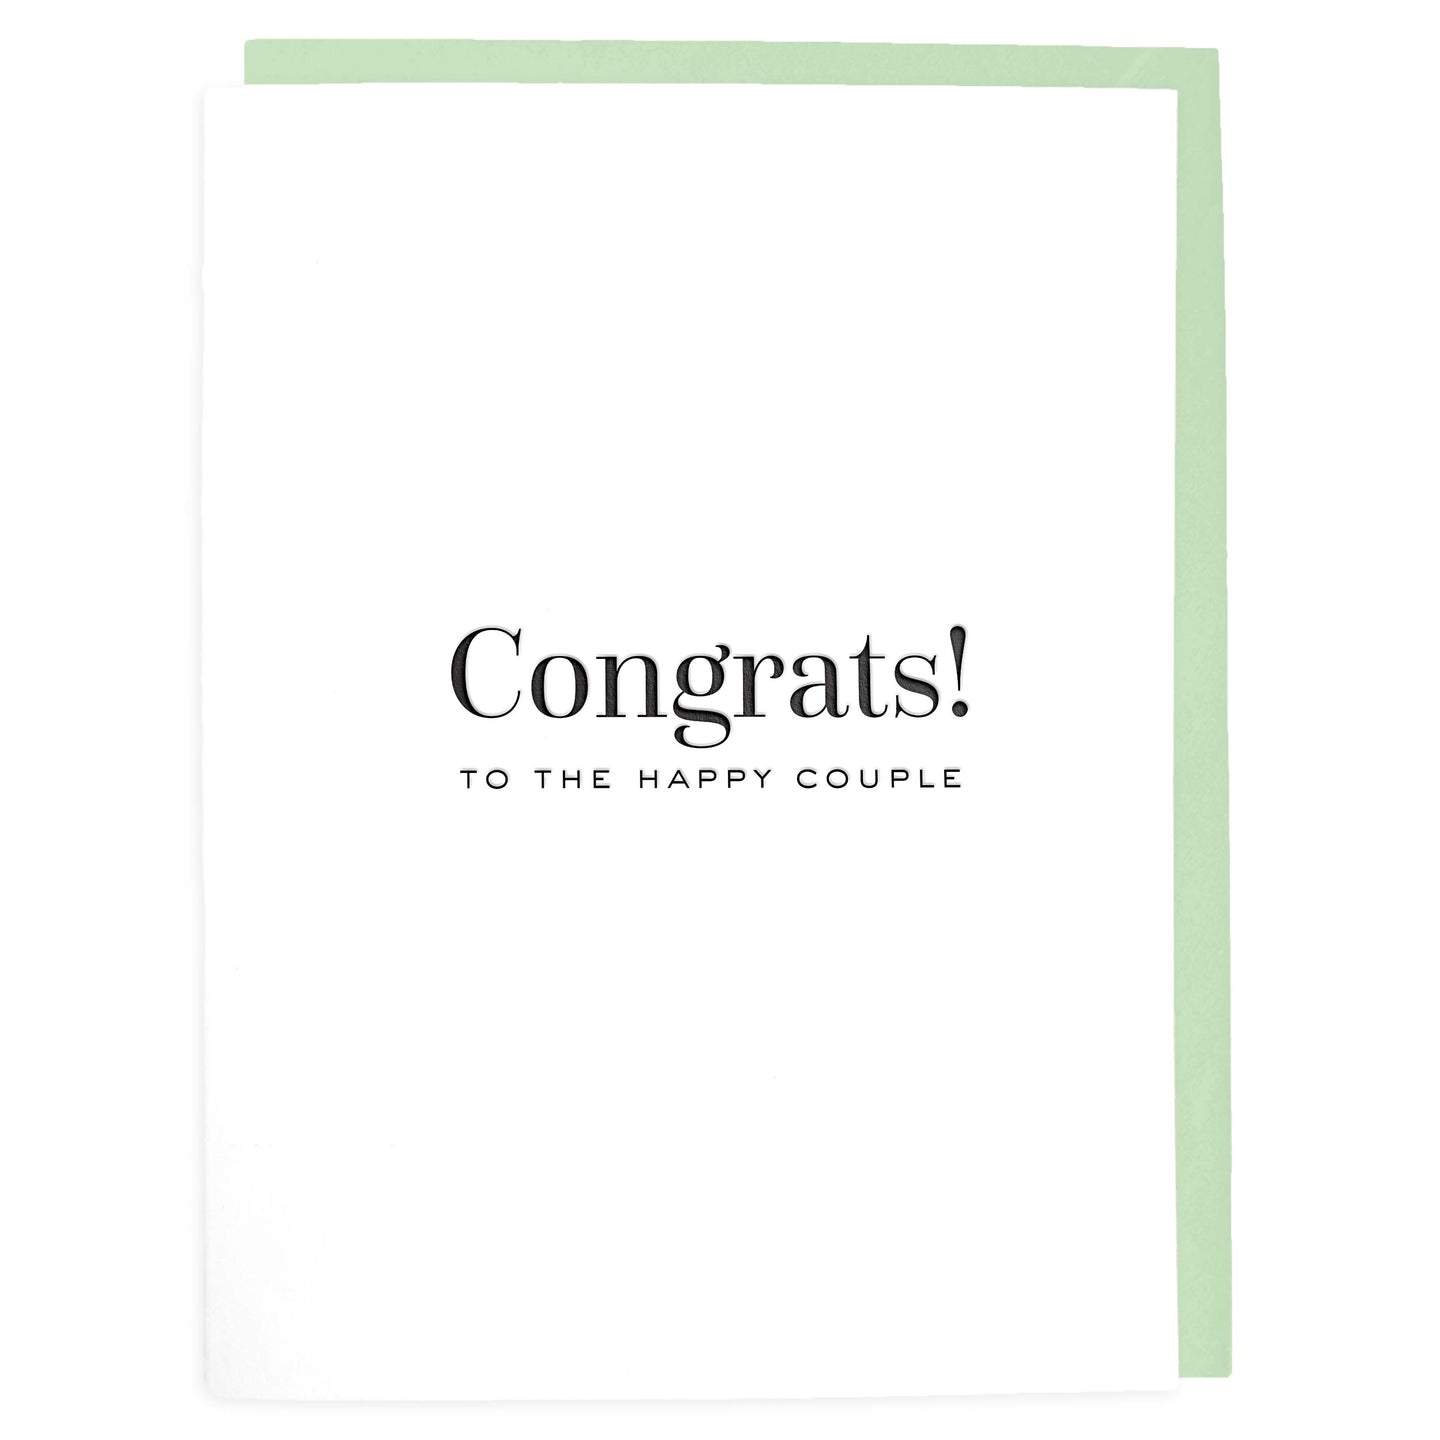 Congrats to the Happy Couple Card - Letterpress Greeting Card - Tea and Becky